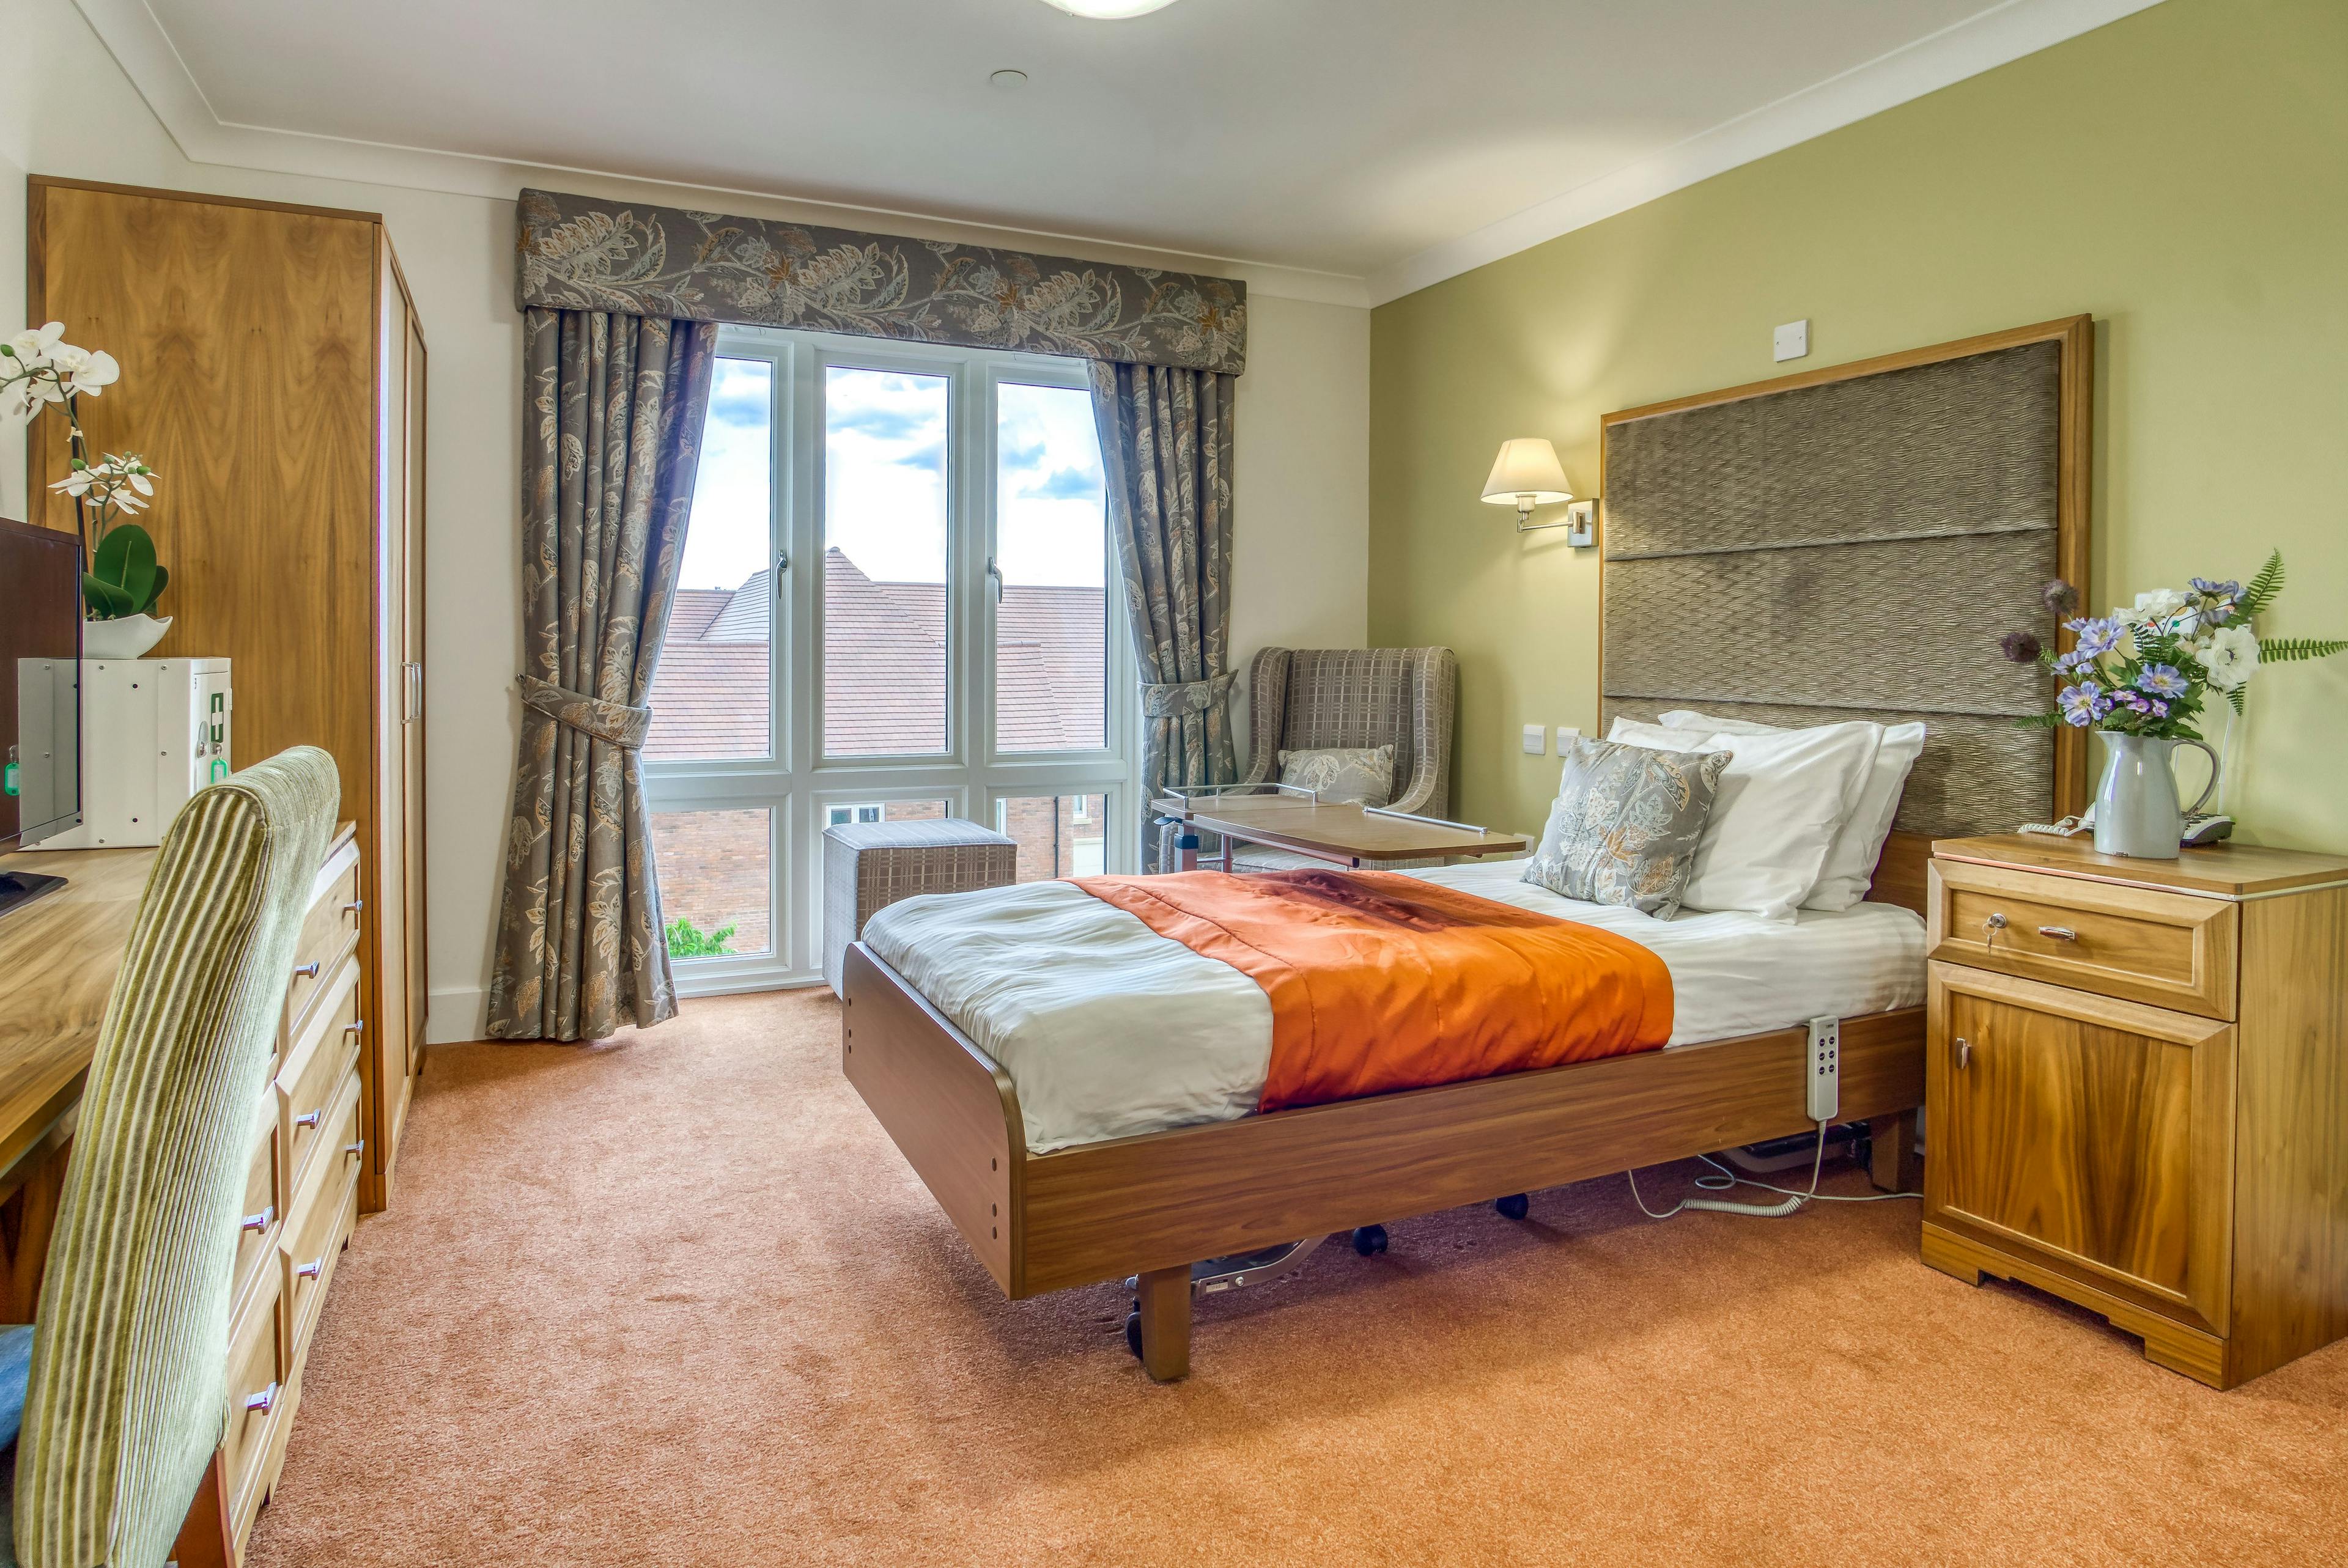 Bedroom of Aston-on-Trent care home in Aston-on-Trent, Derbyshire